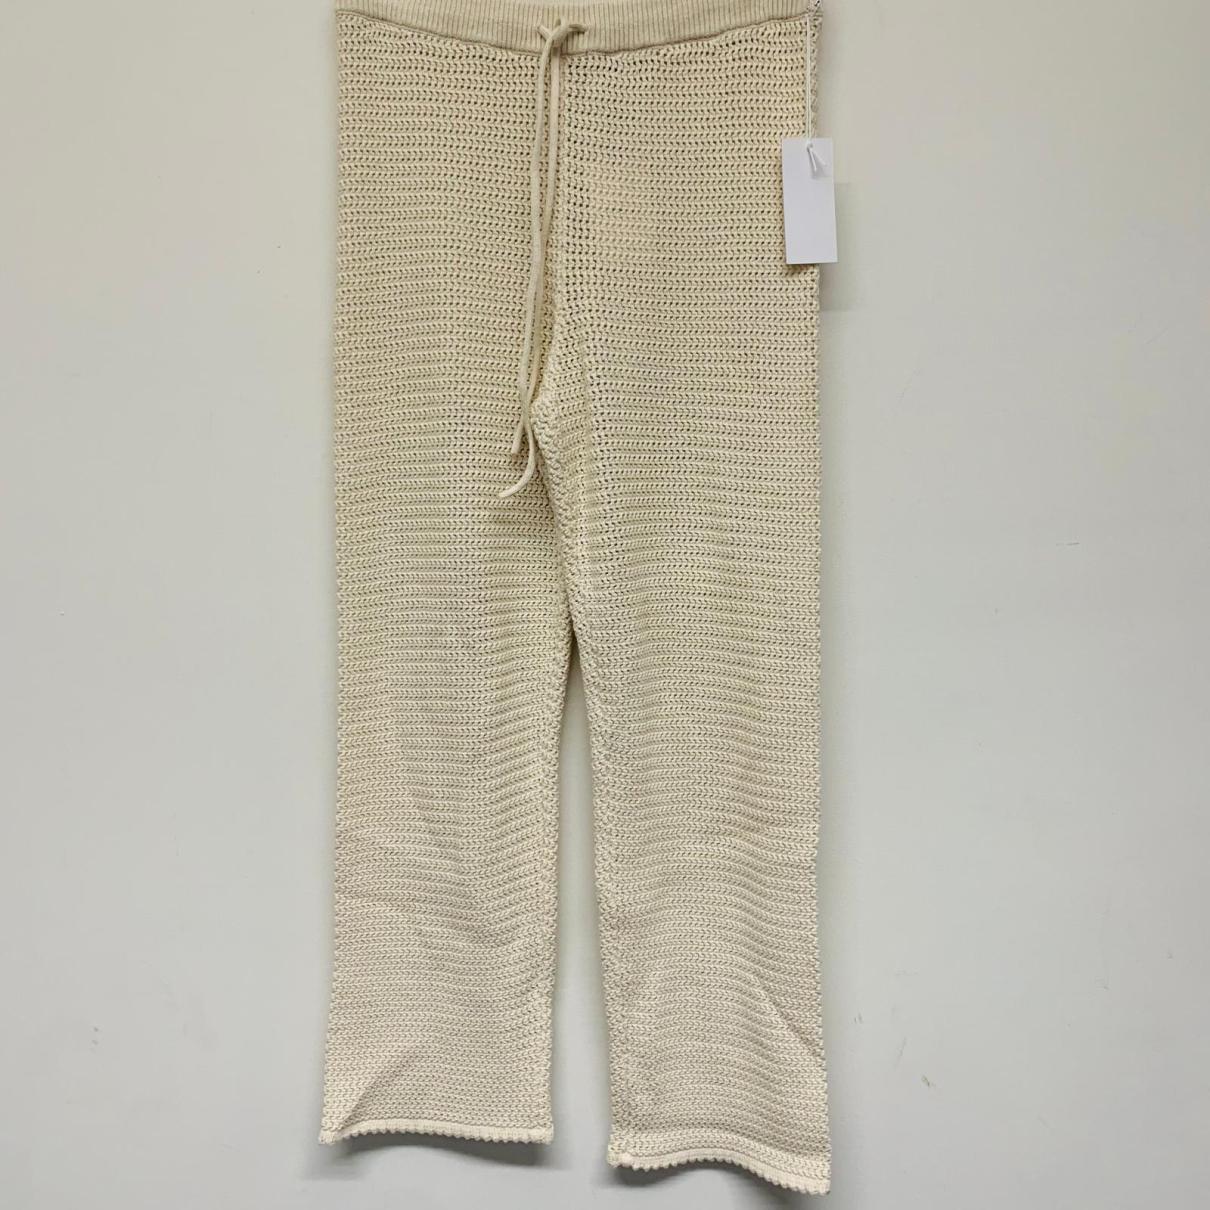 https://images.vestiairecollective.com/cdn-cgi/image/q=75,f=auto,/produit/white-synthetic-reformation-trousers-35136158-12_2.jpg?secret=VC-e9eee96a-a819-4431-ad12-d066be2626ef